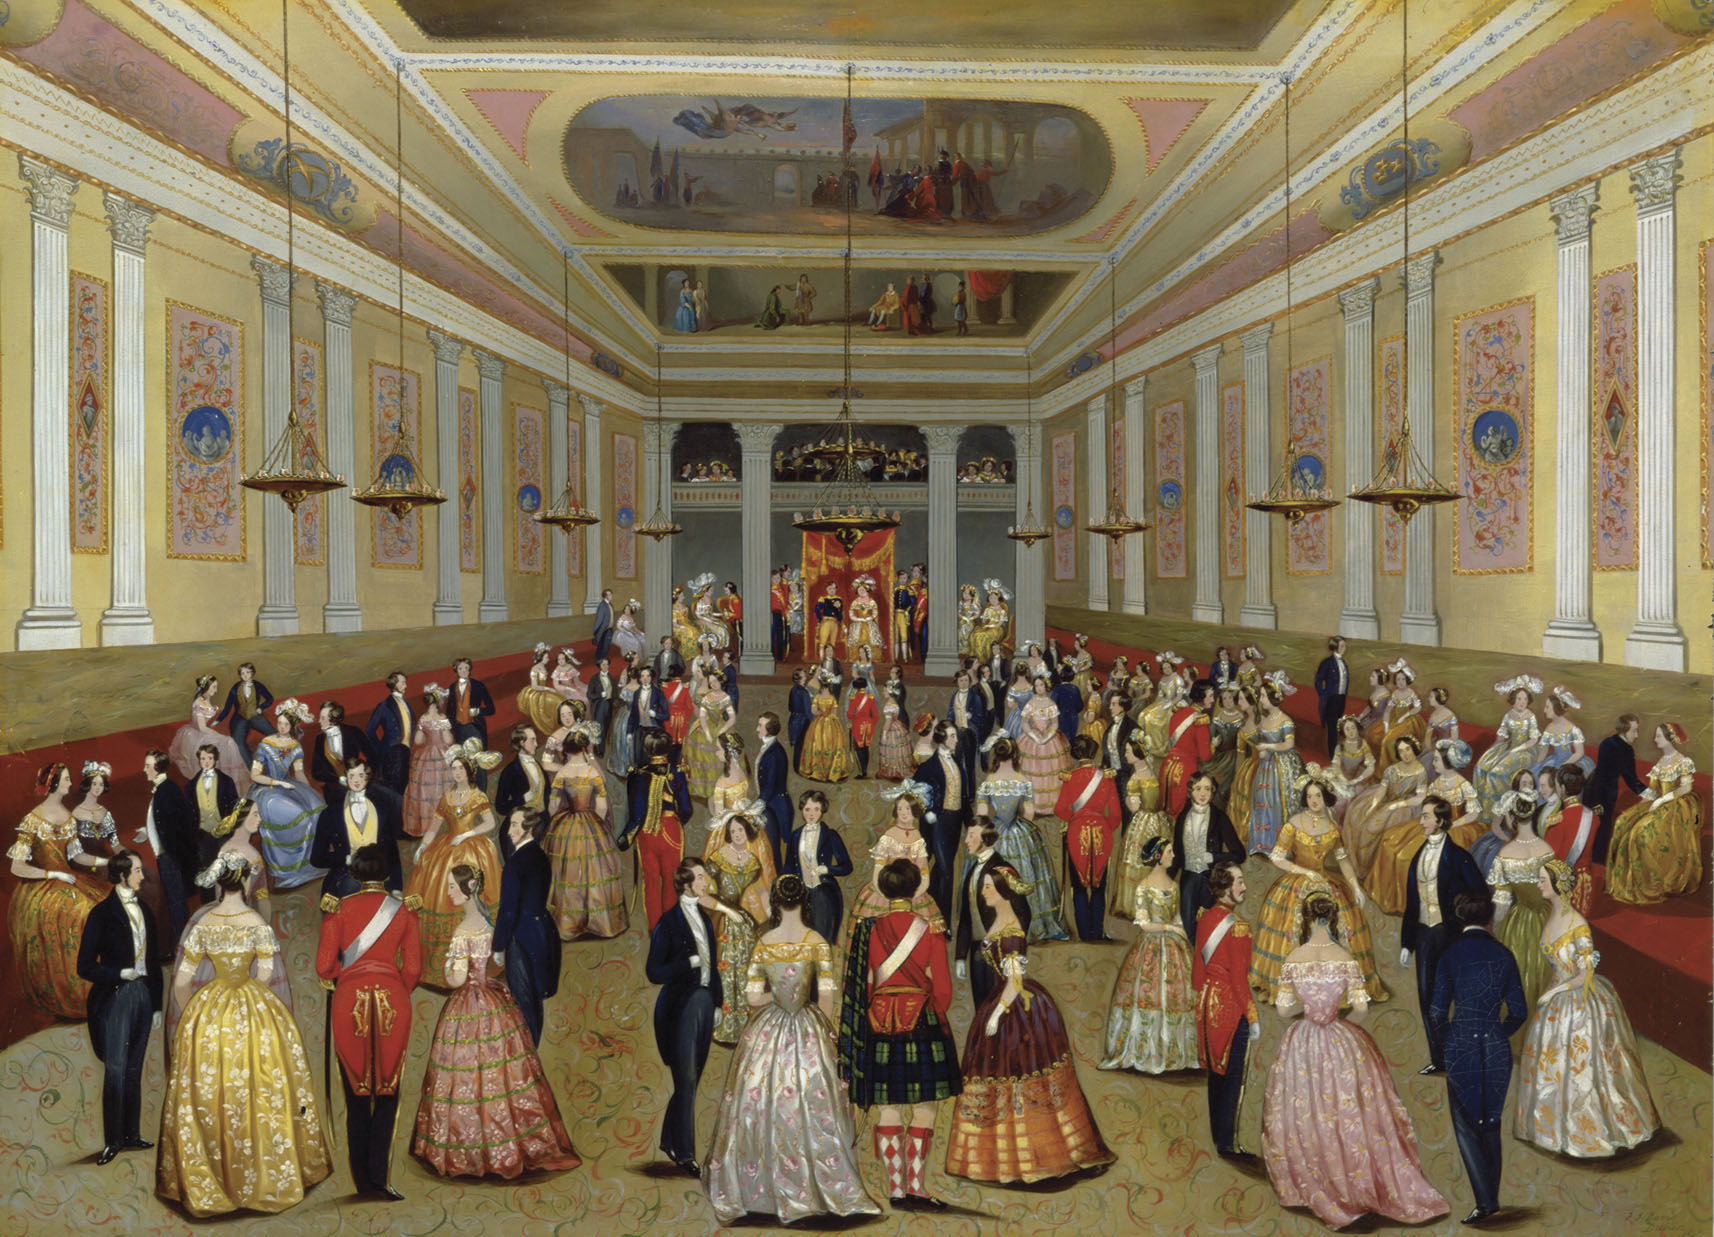 The State Ballroom, St. Patrick’s Hall, Dublin Castle. F.J. Davis, c.1845. This work records one of the major occasions of Dublin’s annual social calendar. Until 1922 the castle was the seat of British Government rule in Ireland. It is now part of the Government of Ireland’s official buildings. On loan from the Brian P. Burns Collection of Irish Art. 